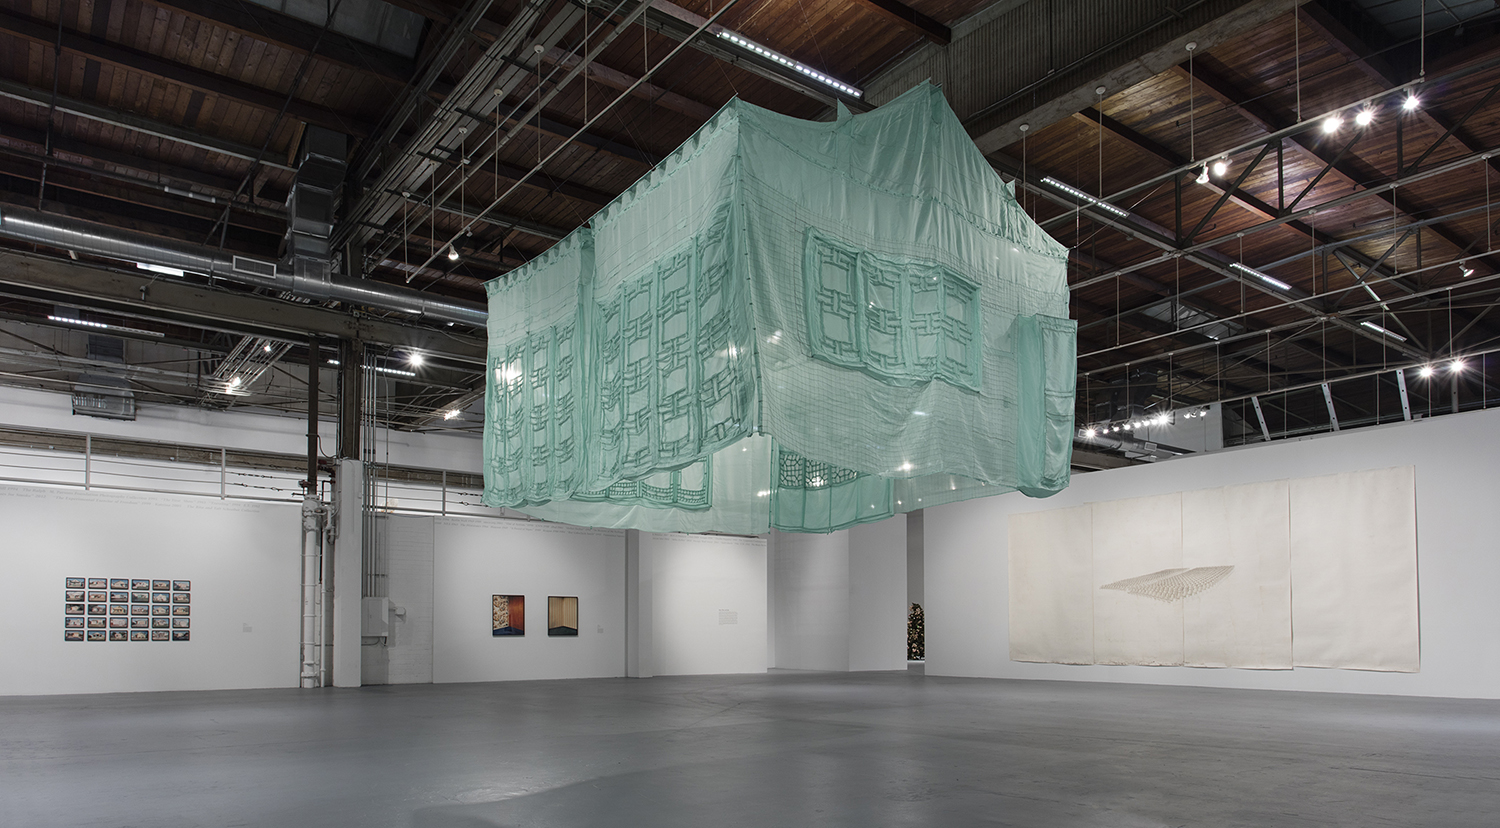 Seoul Home/L.A. Home/New York Home/Baltimore Home/London Home/Seattle Home/L.A. Home (1999) by Do-Ho Suh at MOCA. Image courtesy of MOCA